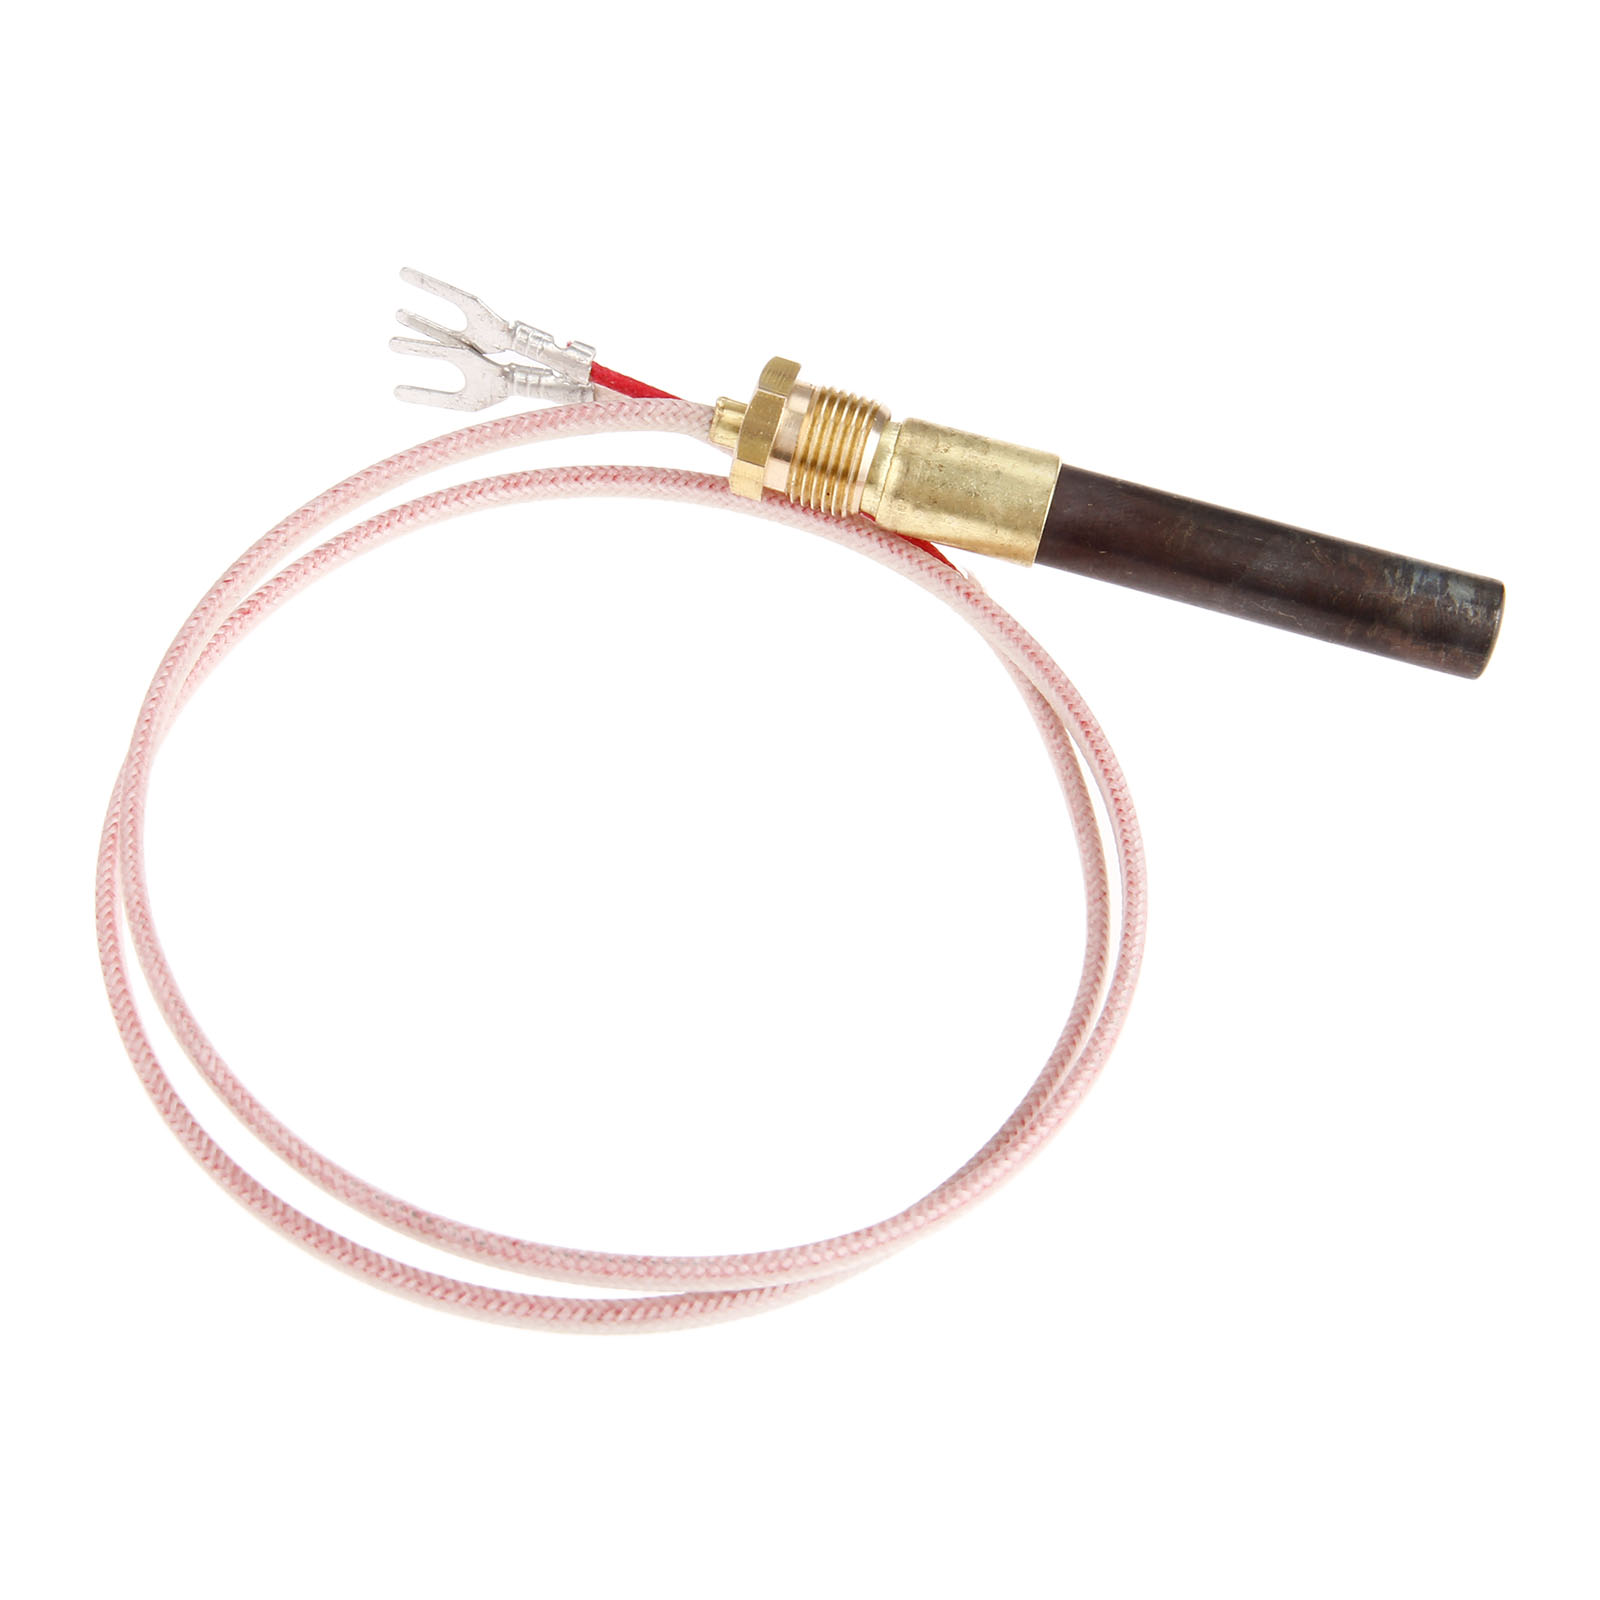 1Pc 24-inch 750-mv Fireplace Millivolt Resistance Universal Thermopile Generators Used In Gas Fireplace Water Heater Equipment